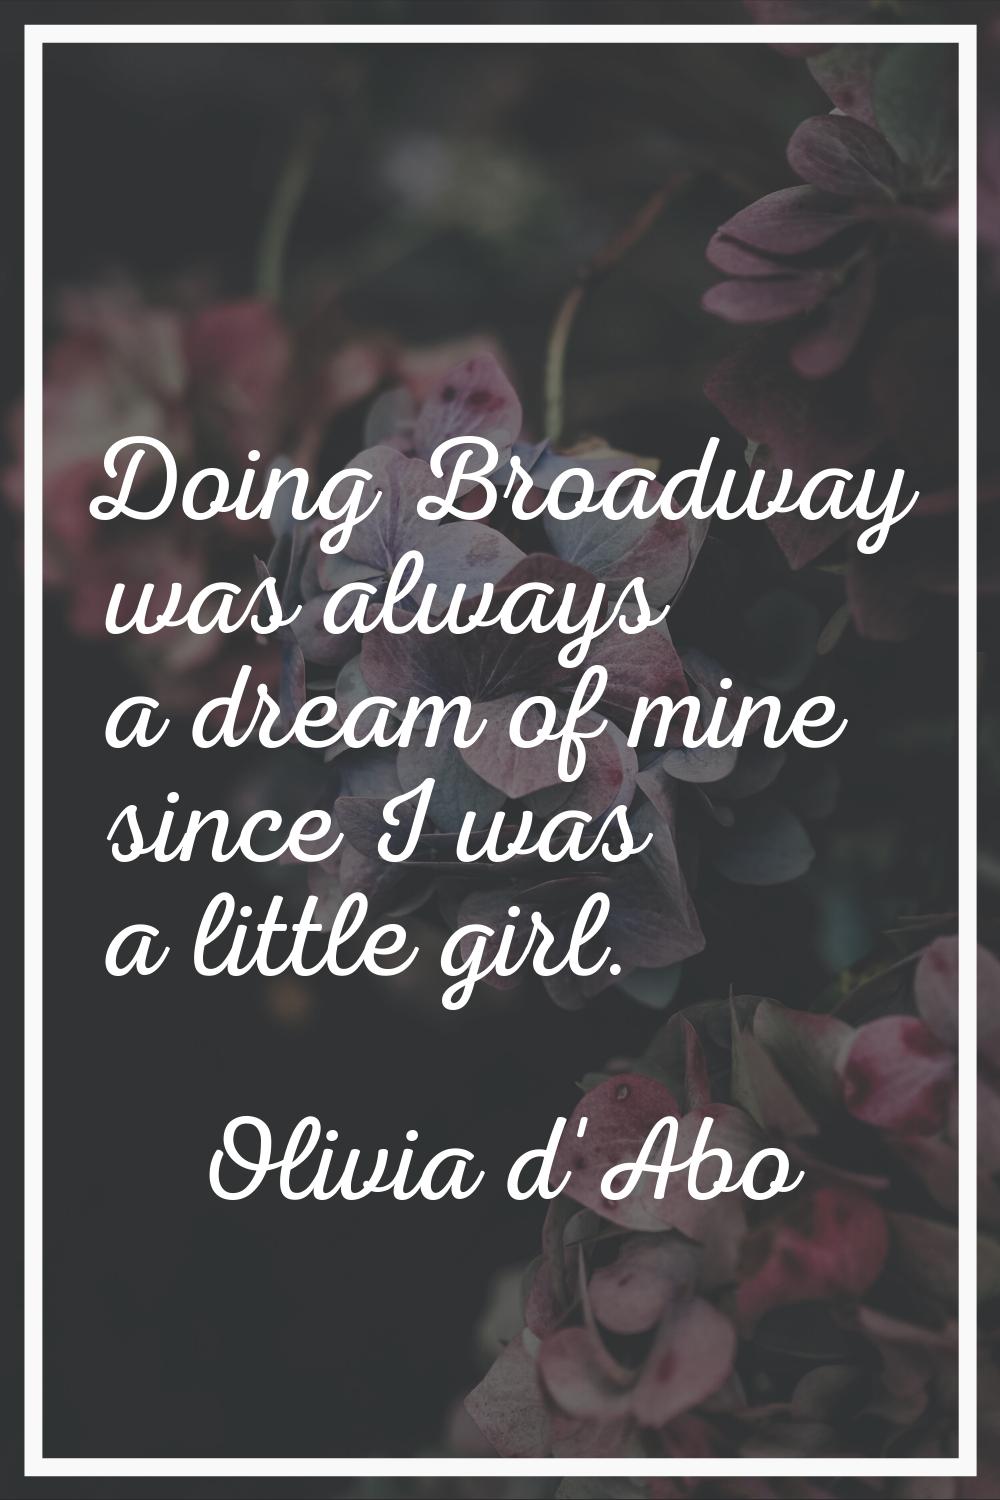 Doing Broadway was always a dream of mine since I was a little girl.